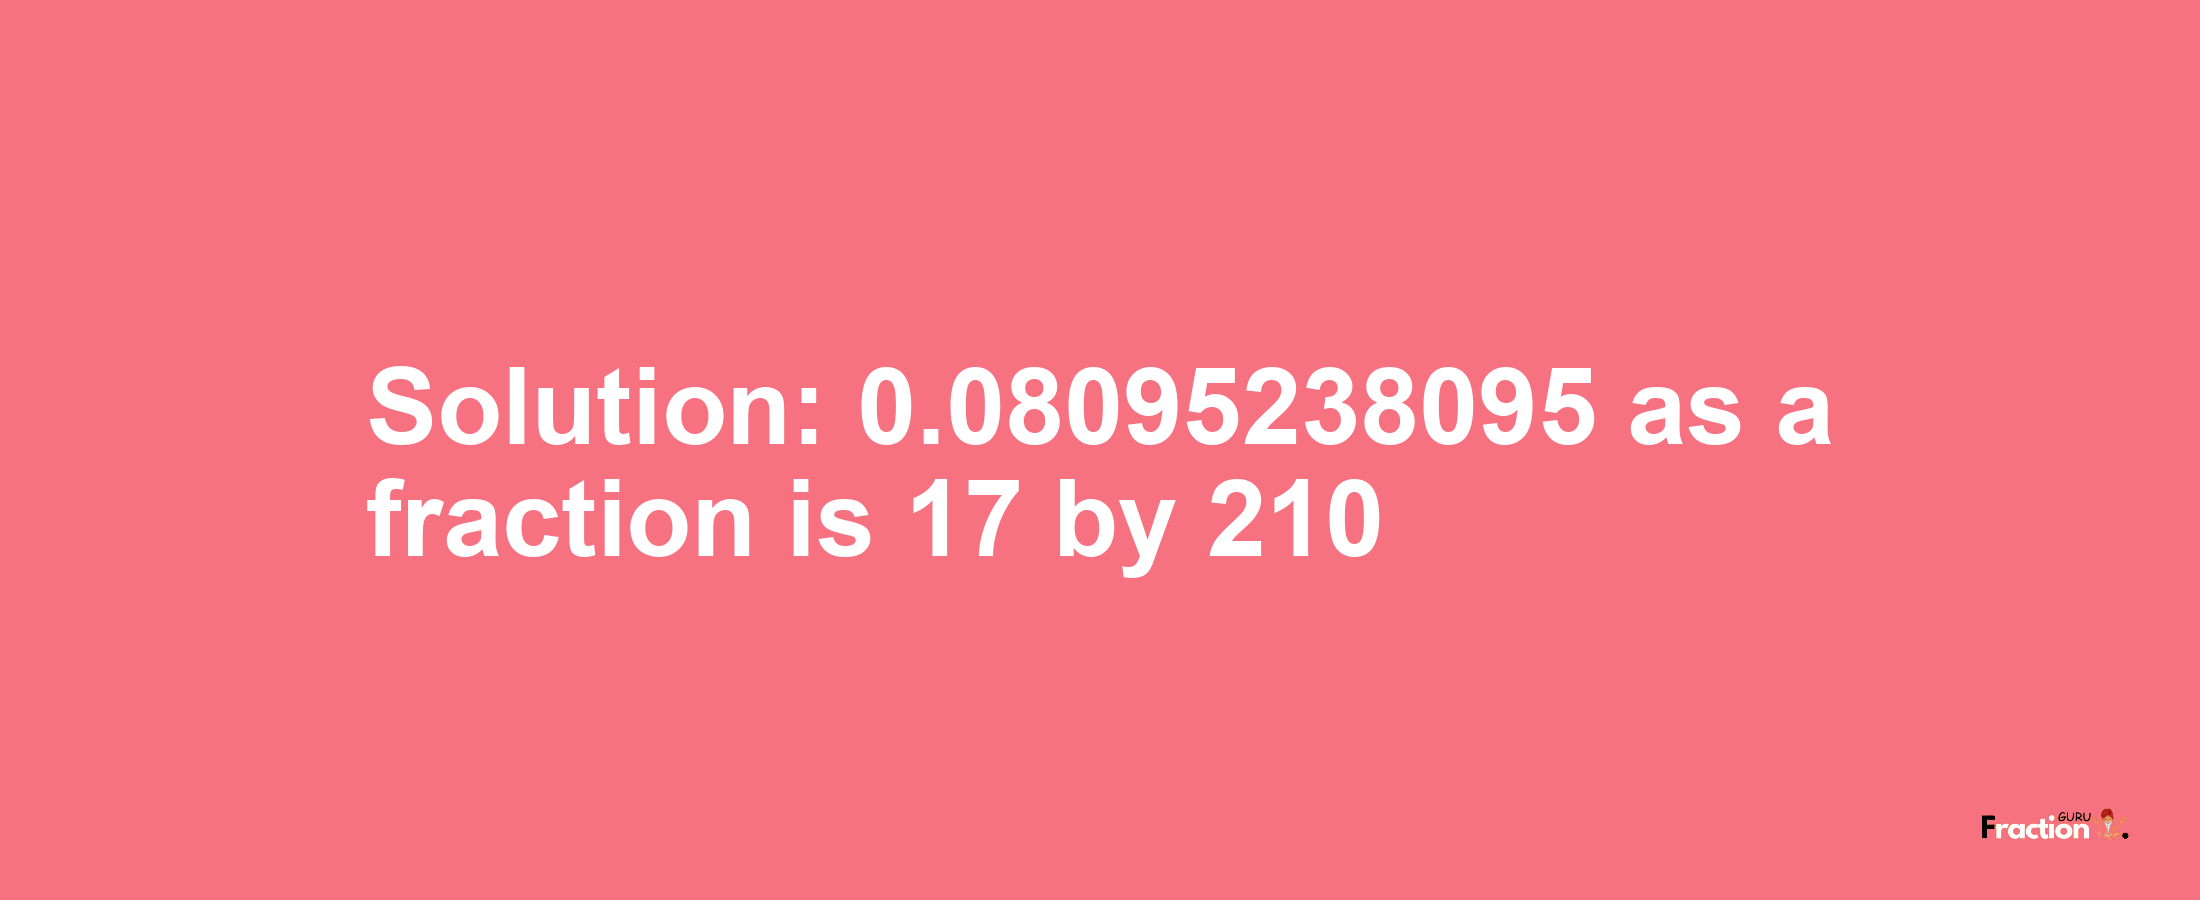 Solution:0.08095238095 as a fraction is 17/210